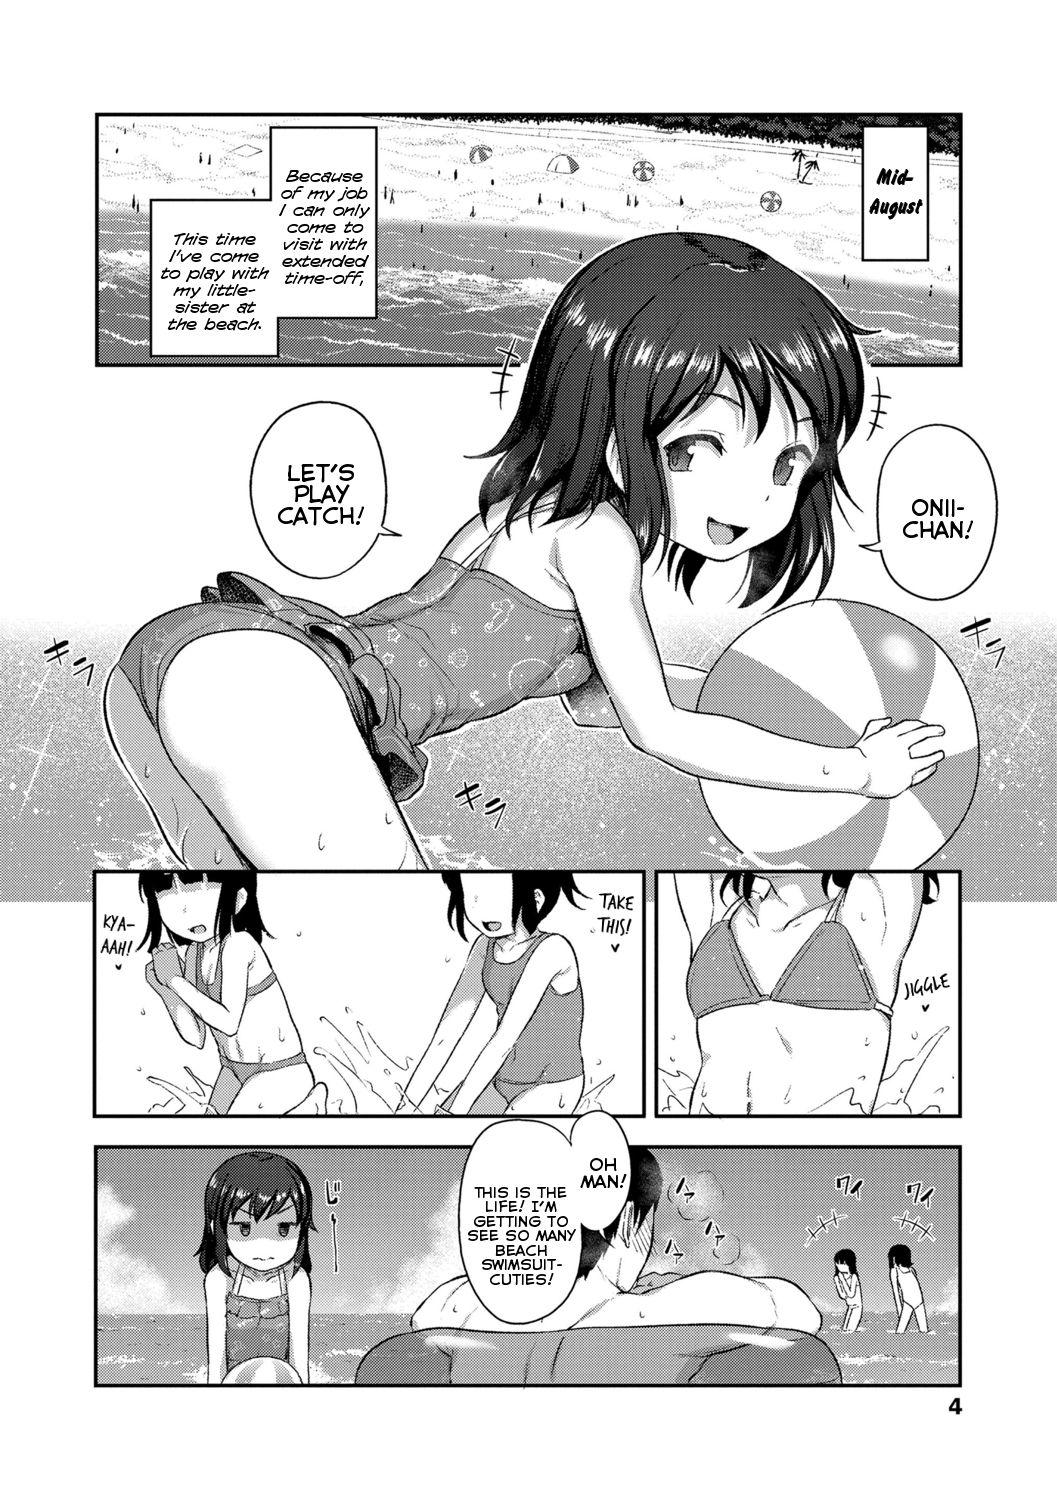 Humiliation [Hayake] Imouto no Hadaka o Mite Koufun Suru nante Hen na Onii-chan | What Kind of Weirdo Onii-chan Gets Excited From Seeing His Little Sister Naked? [English] [Mistvern + Shippoyasha] [Digital] Muscles - Page 6